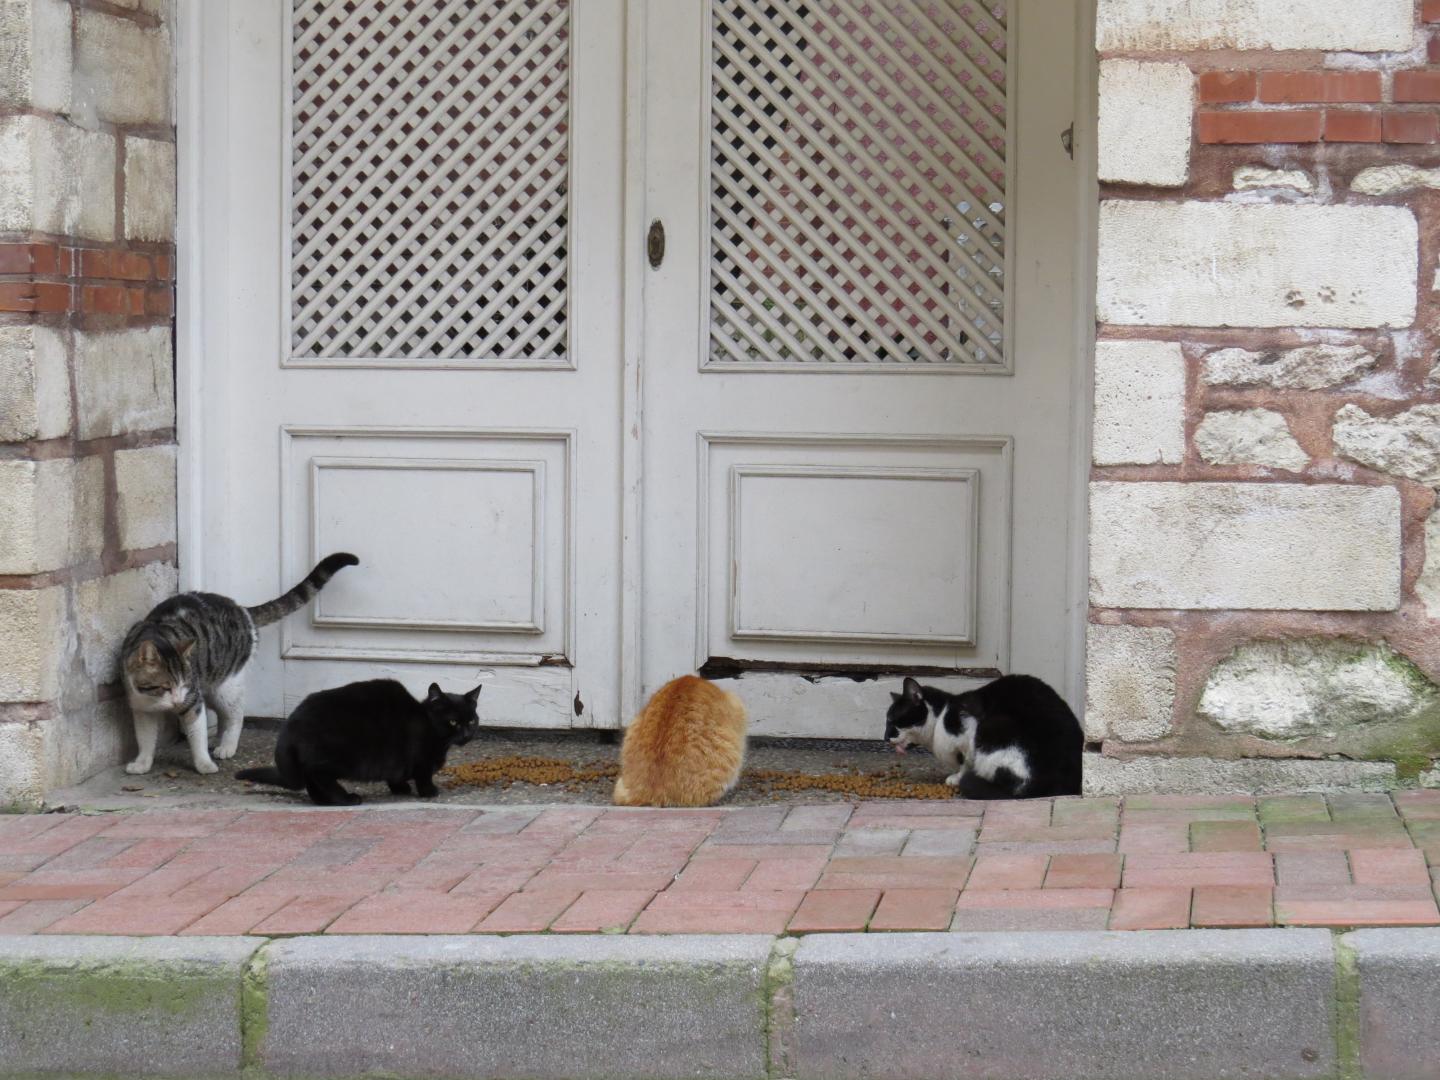 Free-Roaming Cats to Benefit from Contraceptive Vaccine Intiative